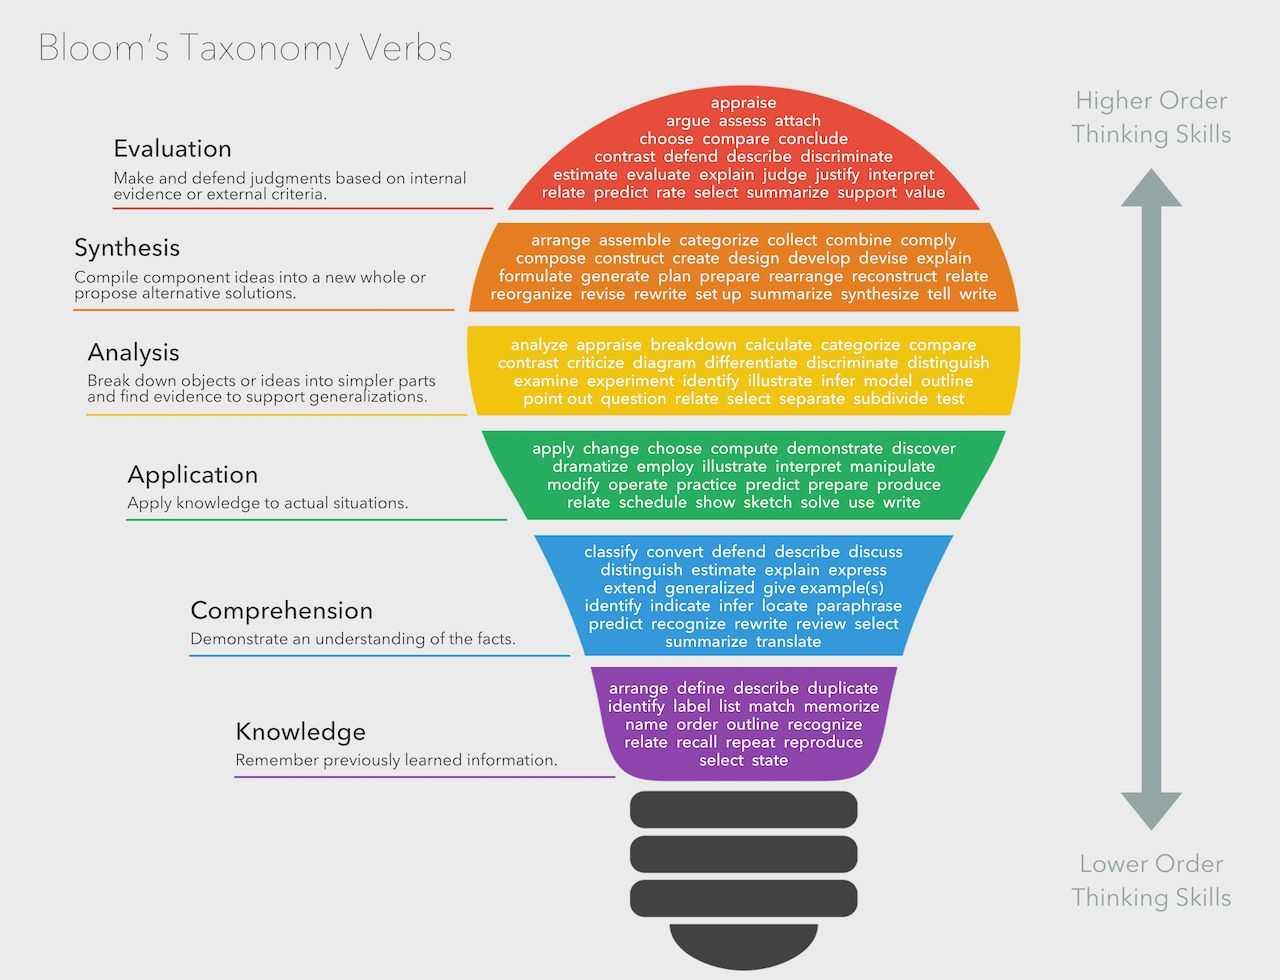 Using Bloom's Taxonomy for Effective Learning